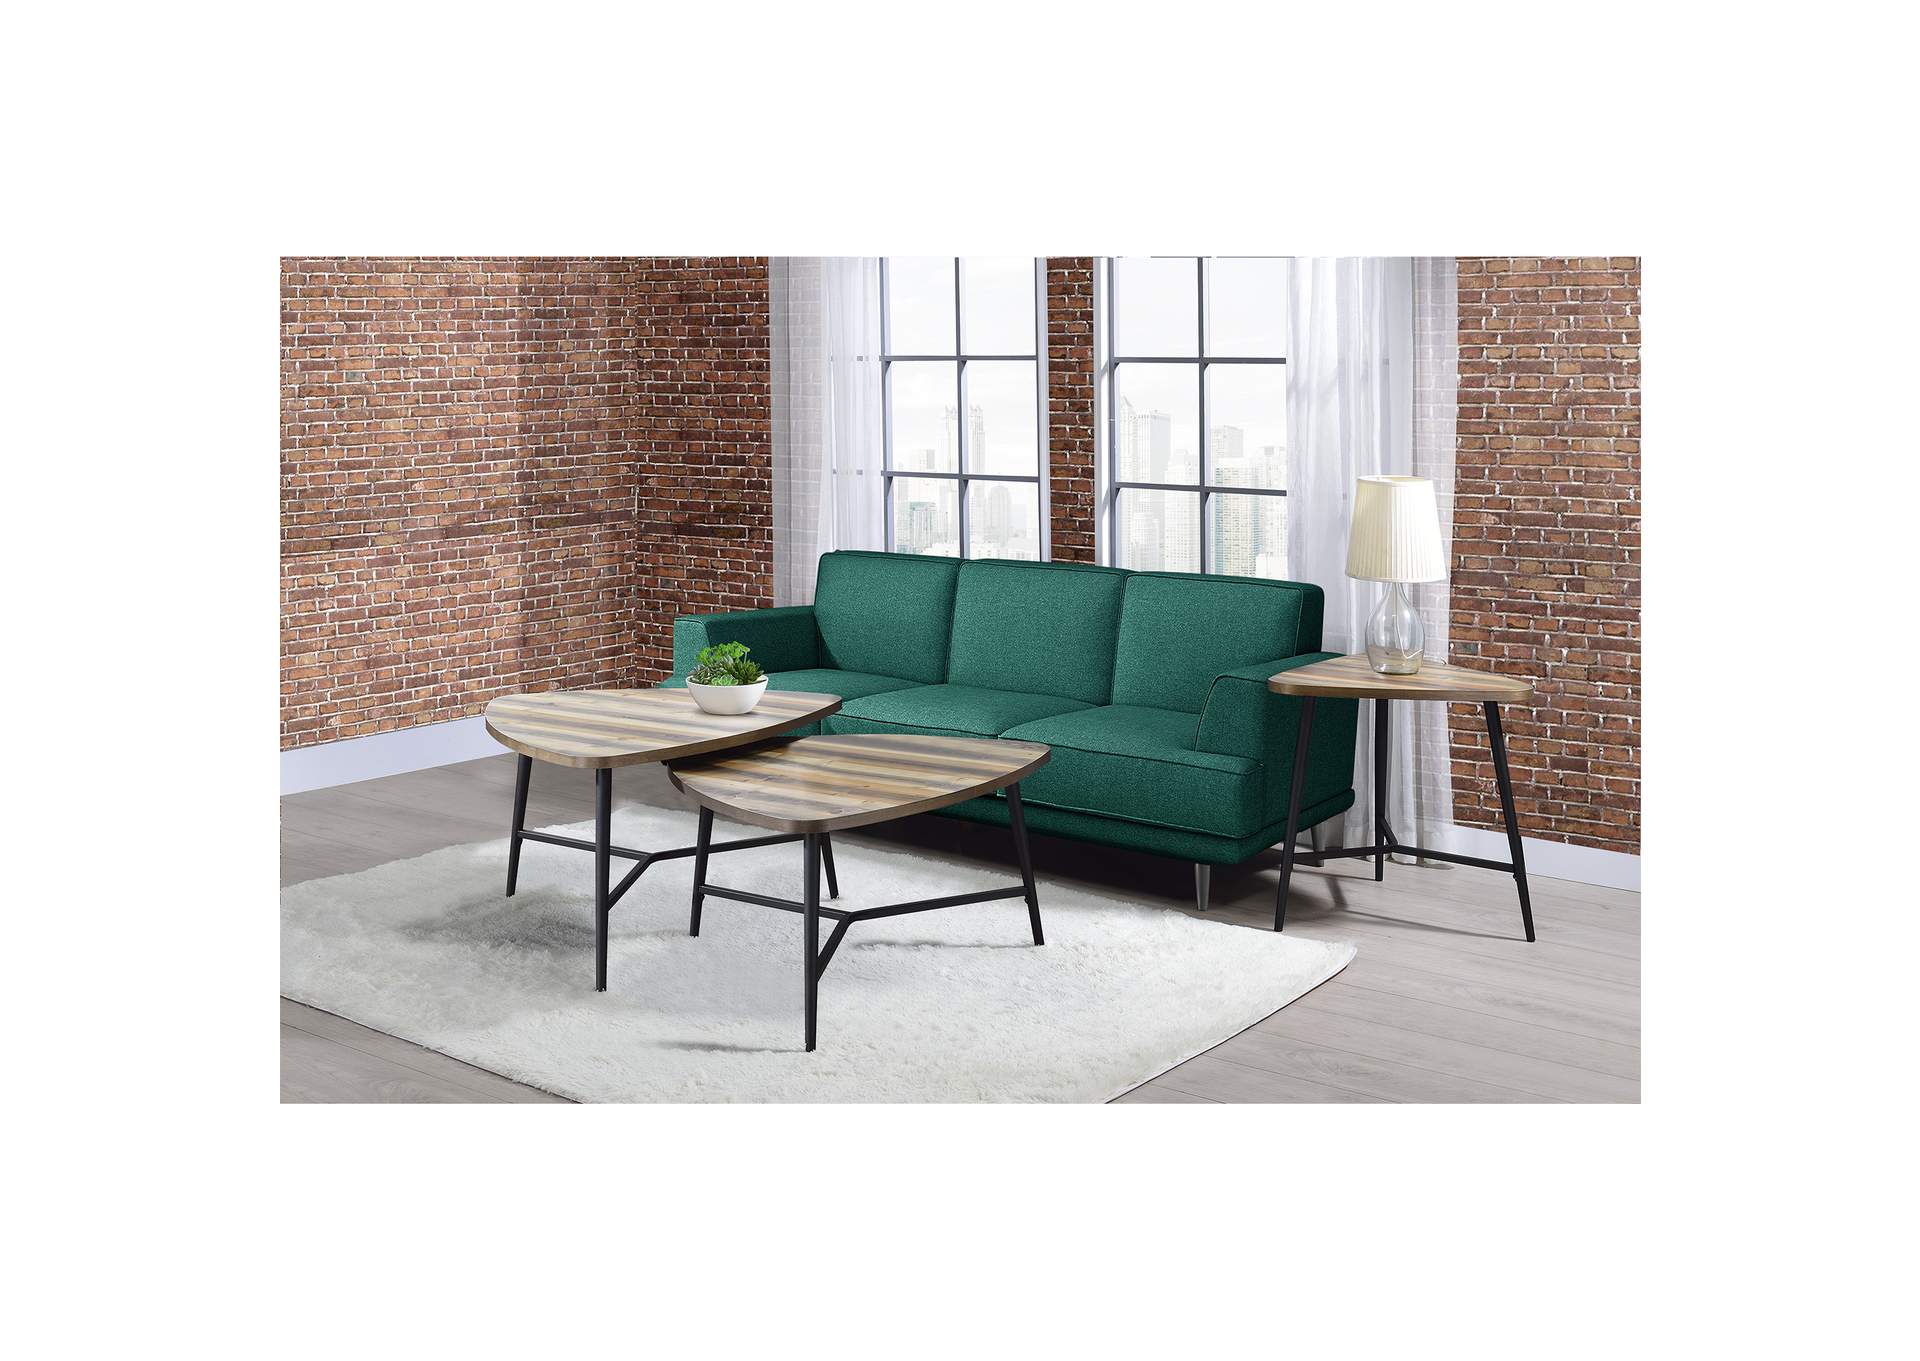 Tribeca 1018 - Ct3 End Table,Elements